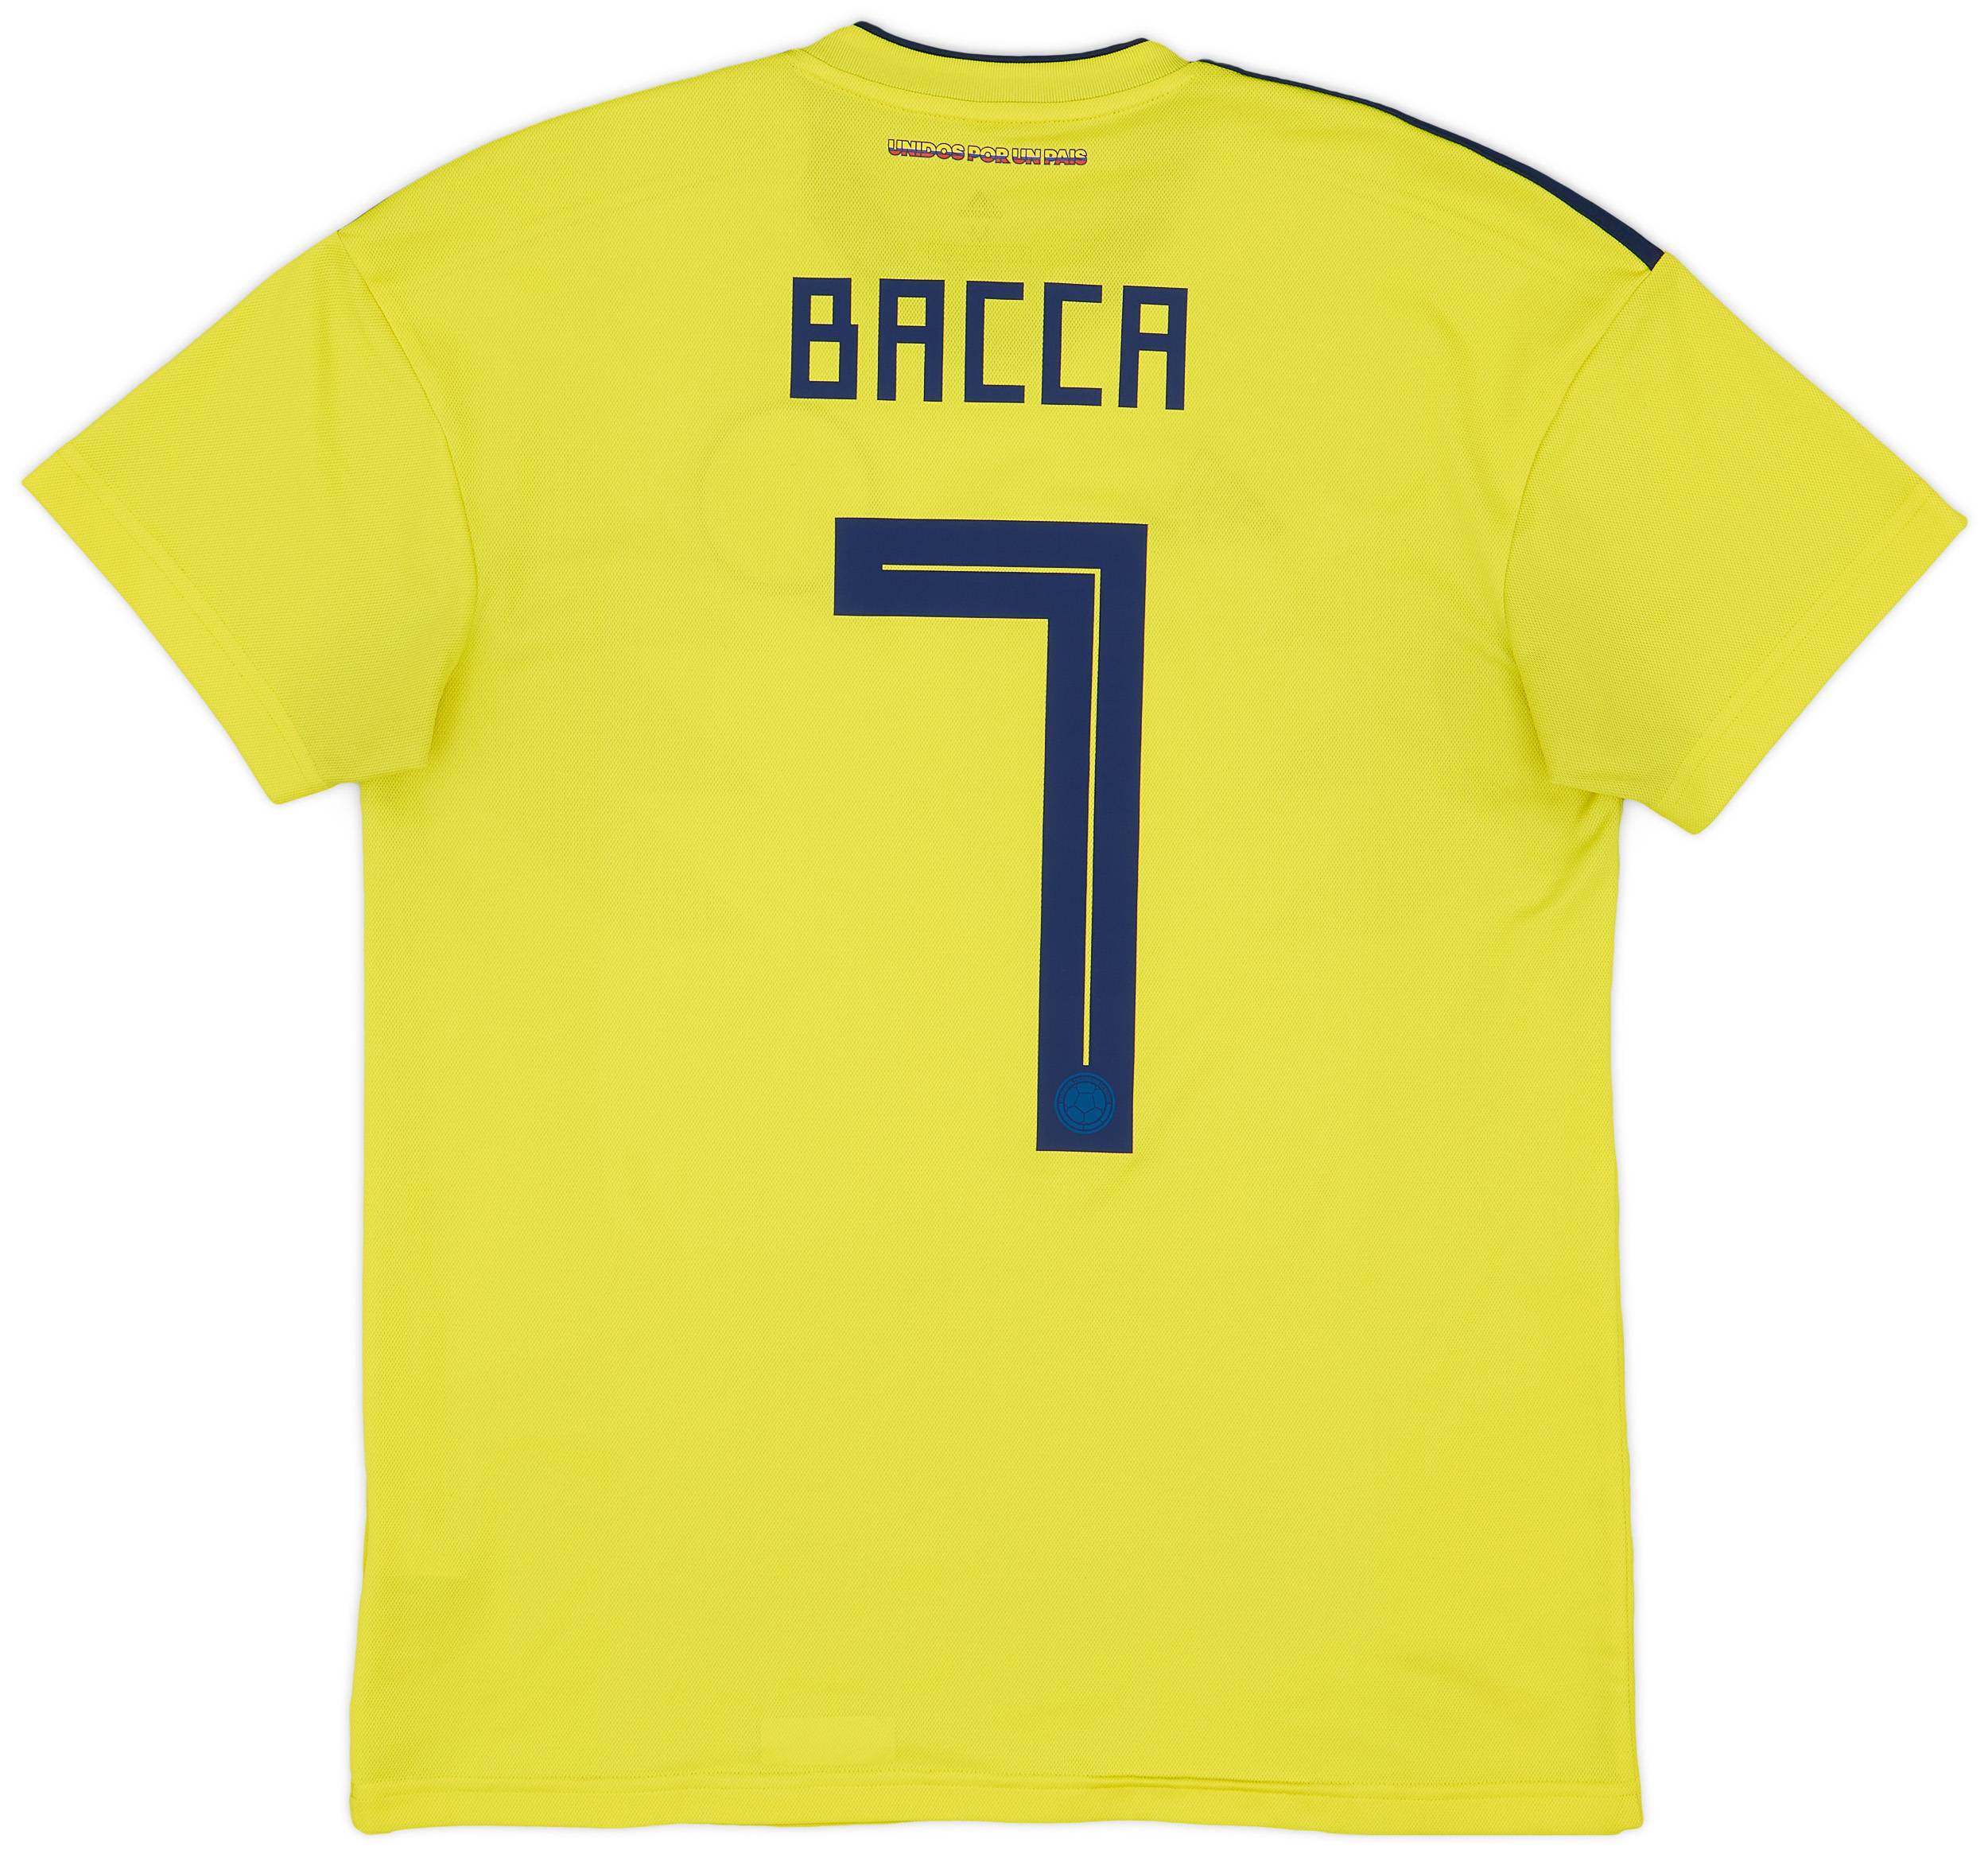 2018-19 Colombia Home Shirt Bacca #7 - 7/10 - (M)